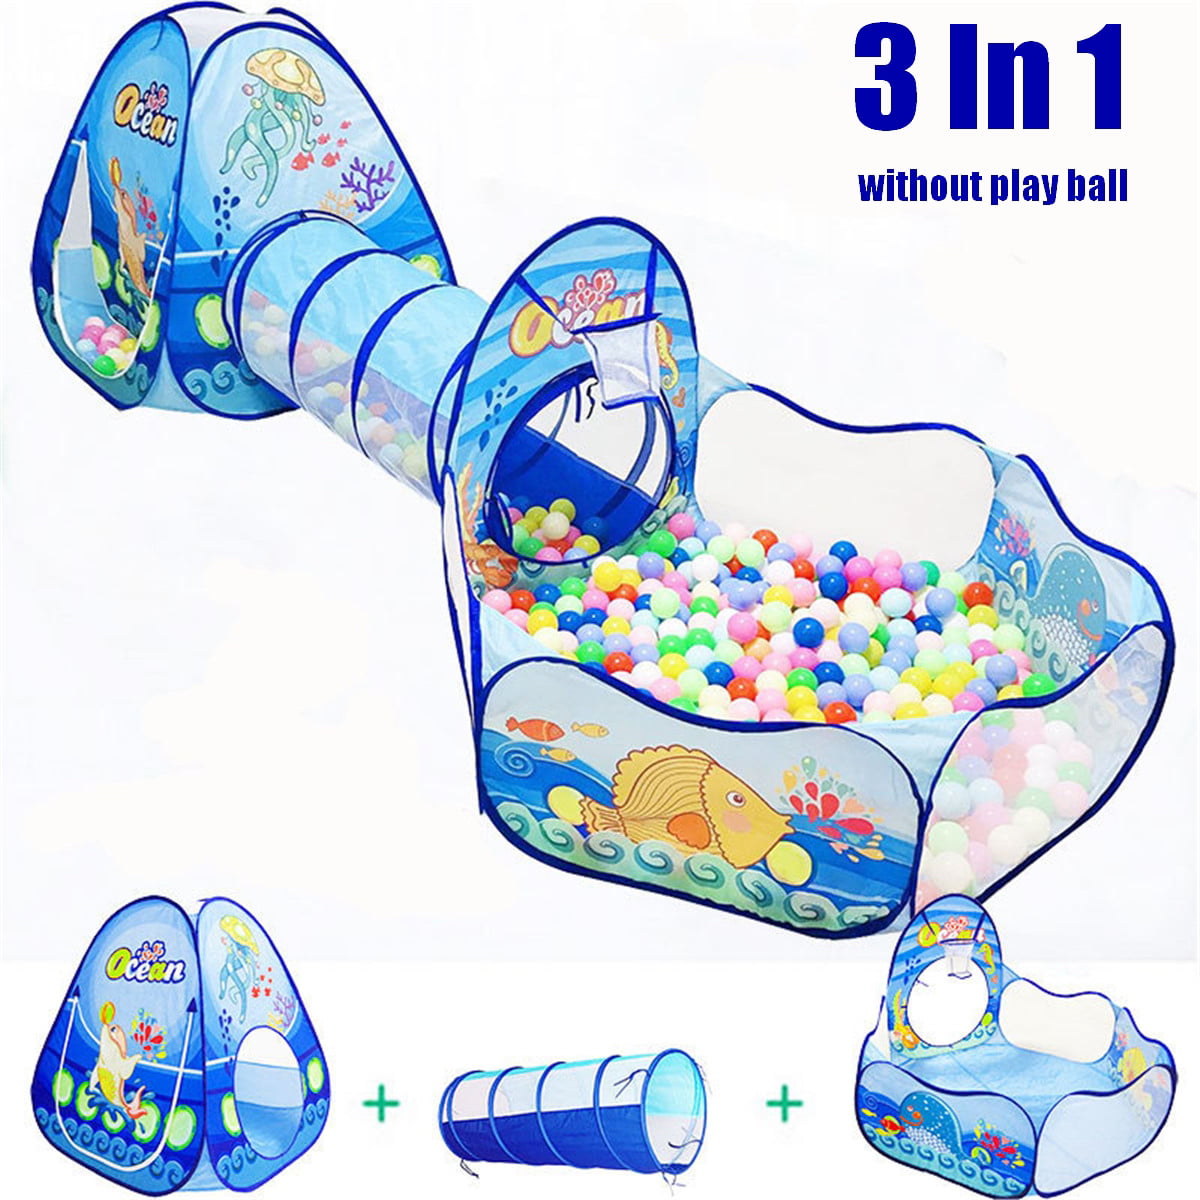 Kids Crawl Play Tunnel with Safety Meshing for Children Visibility 4.3 Foot Folding Playhouse Tunnel Toy